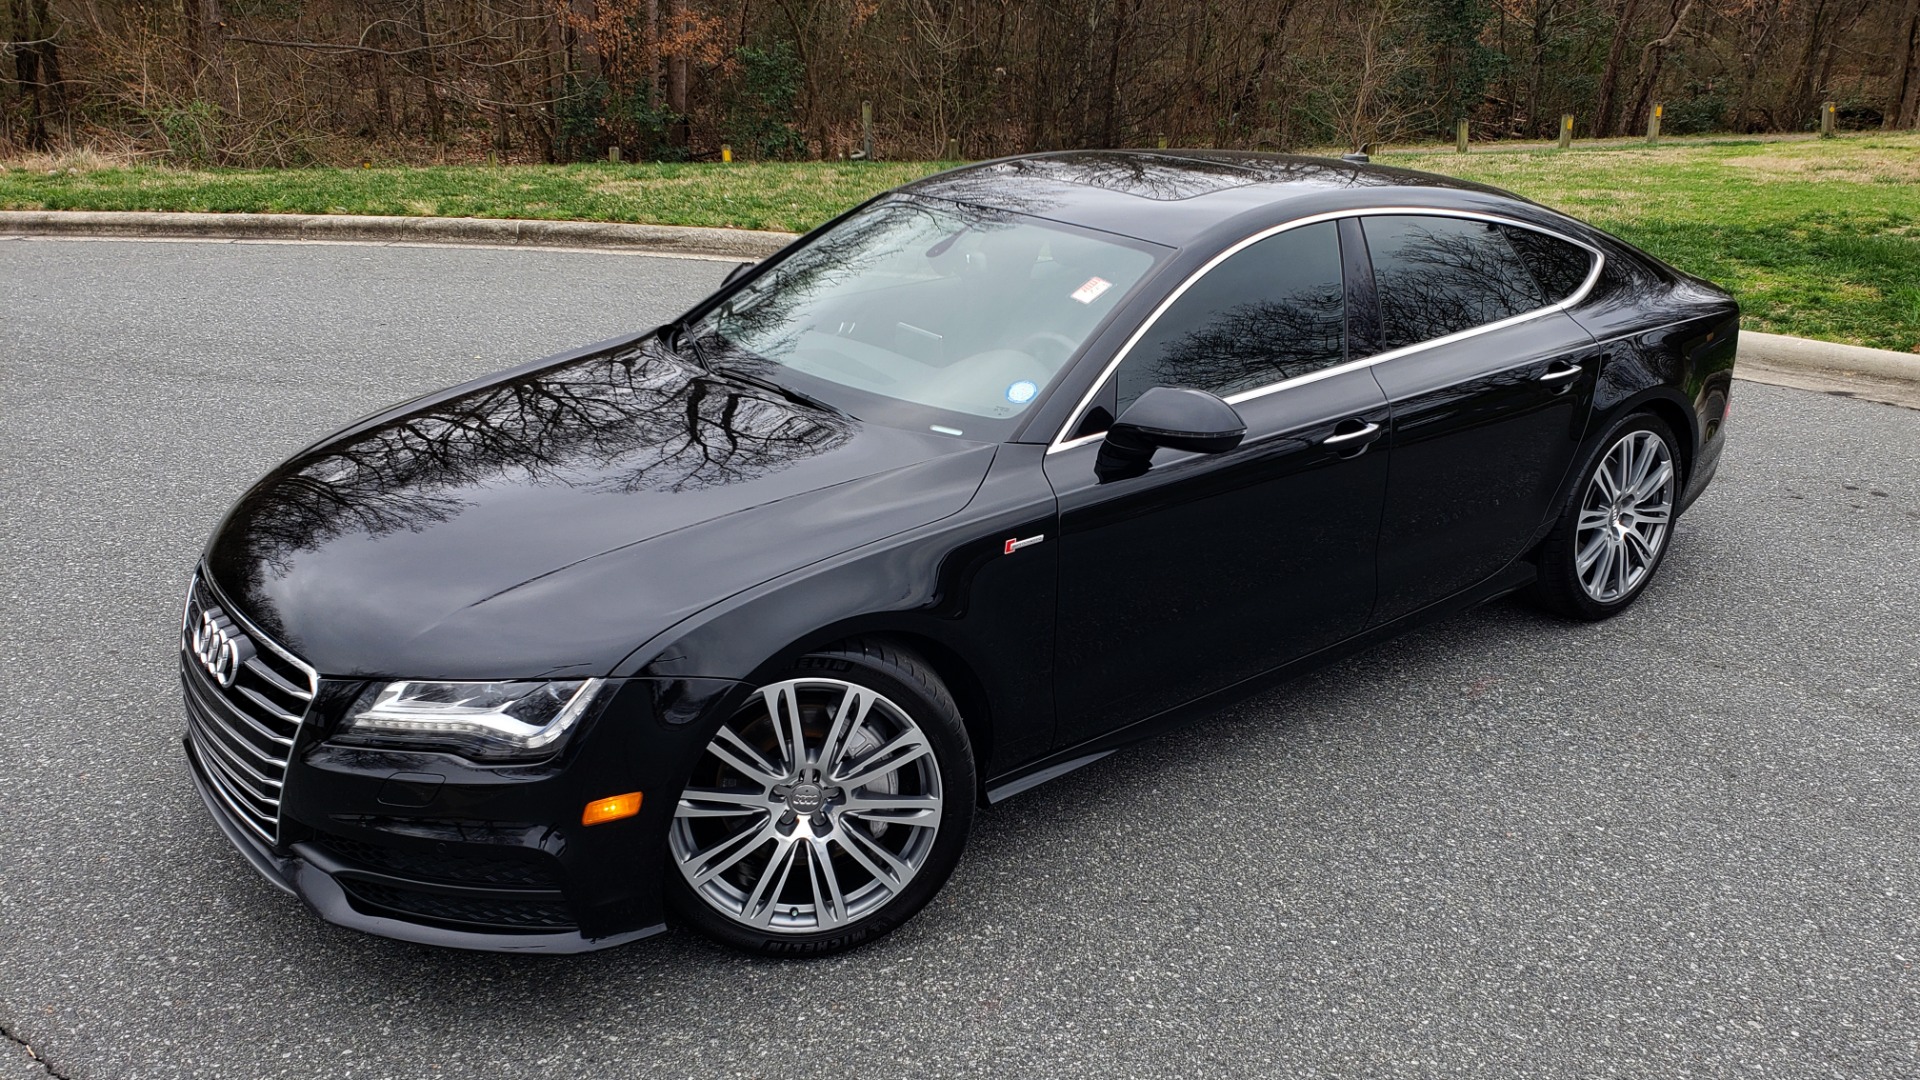 Used 2014 Audi A7 3.0 PRESTIGE / NAV / SUNROOF / BOSE / REARVIEW for sale Sold at Formula Imports in Charlotte NC 28227 2